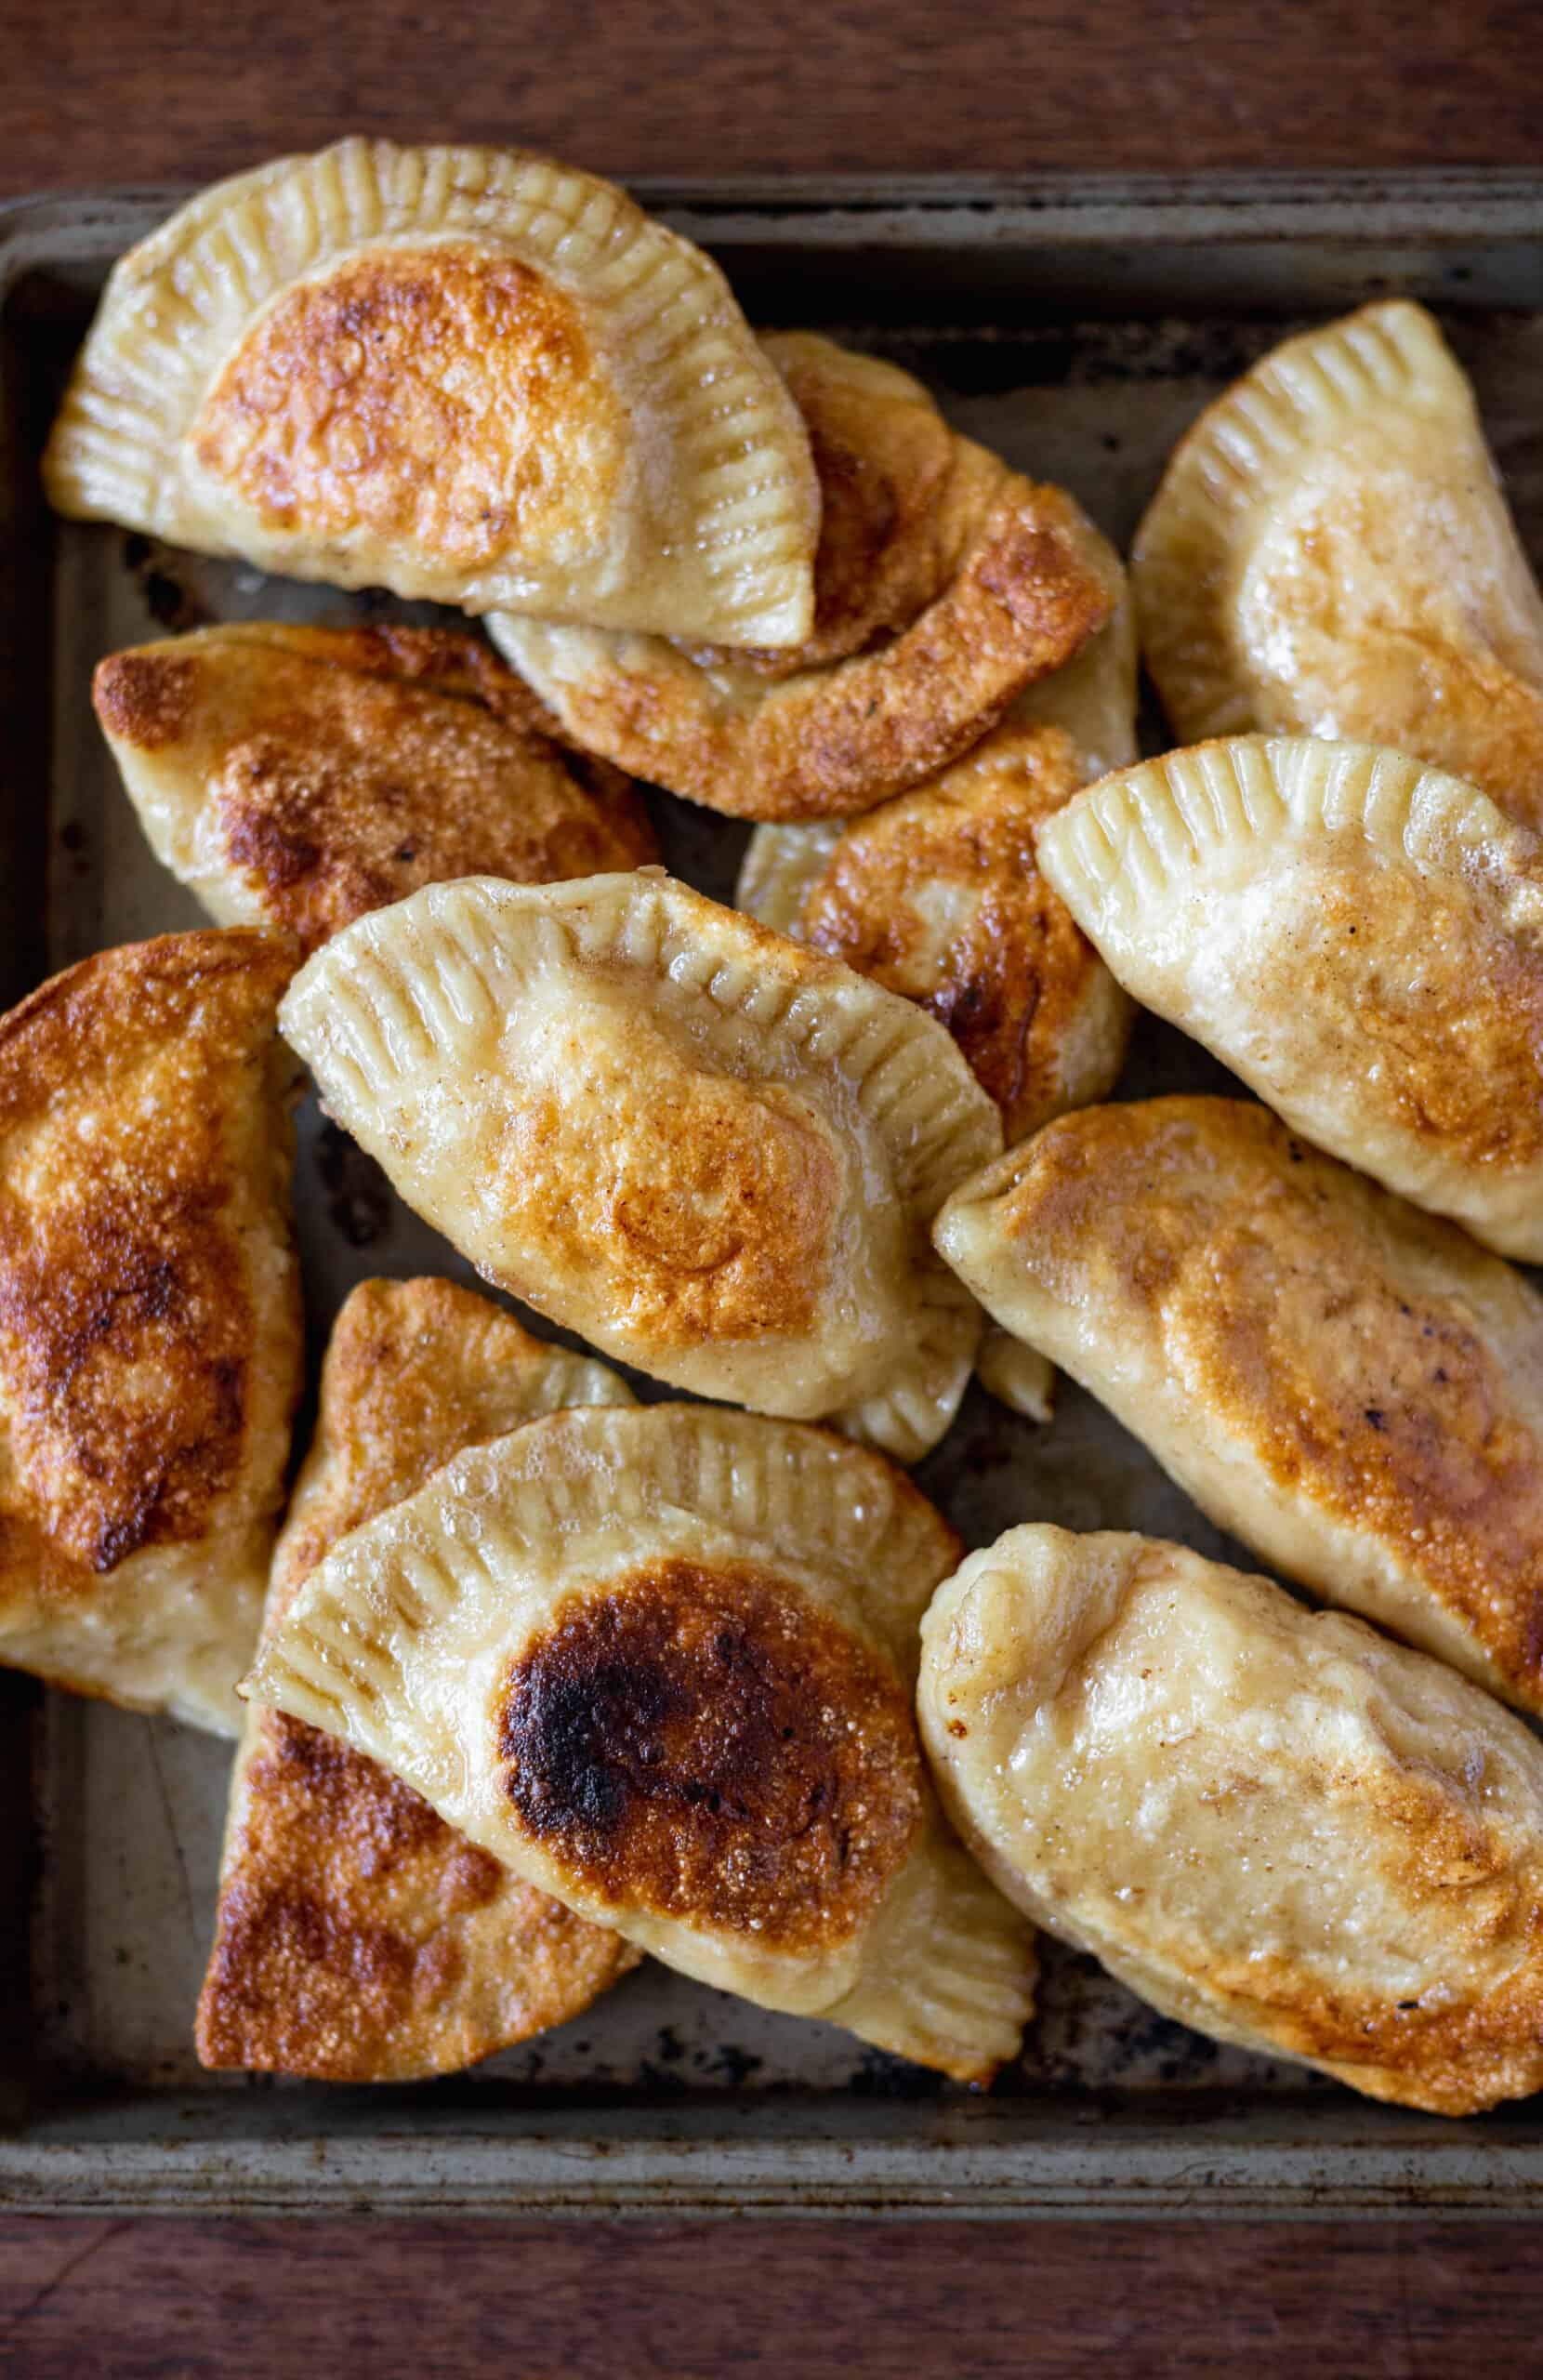 Pierogi after being sauteed are golden brown in a pan